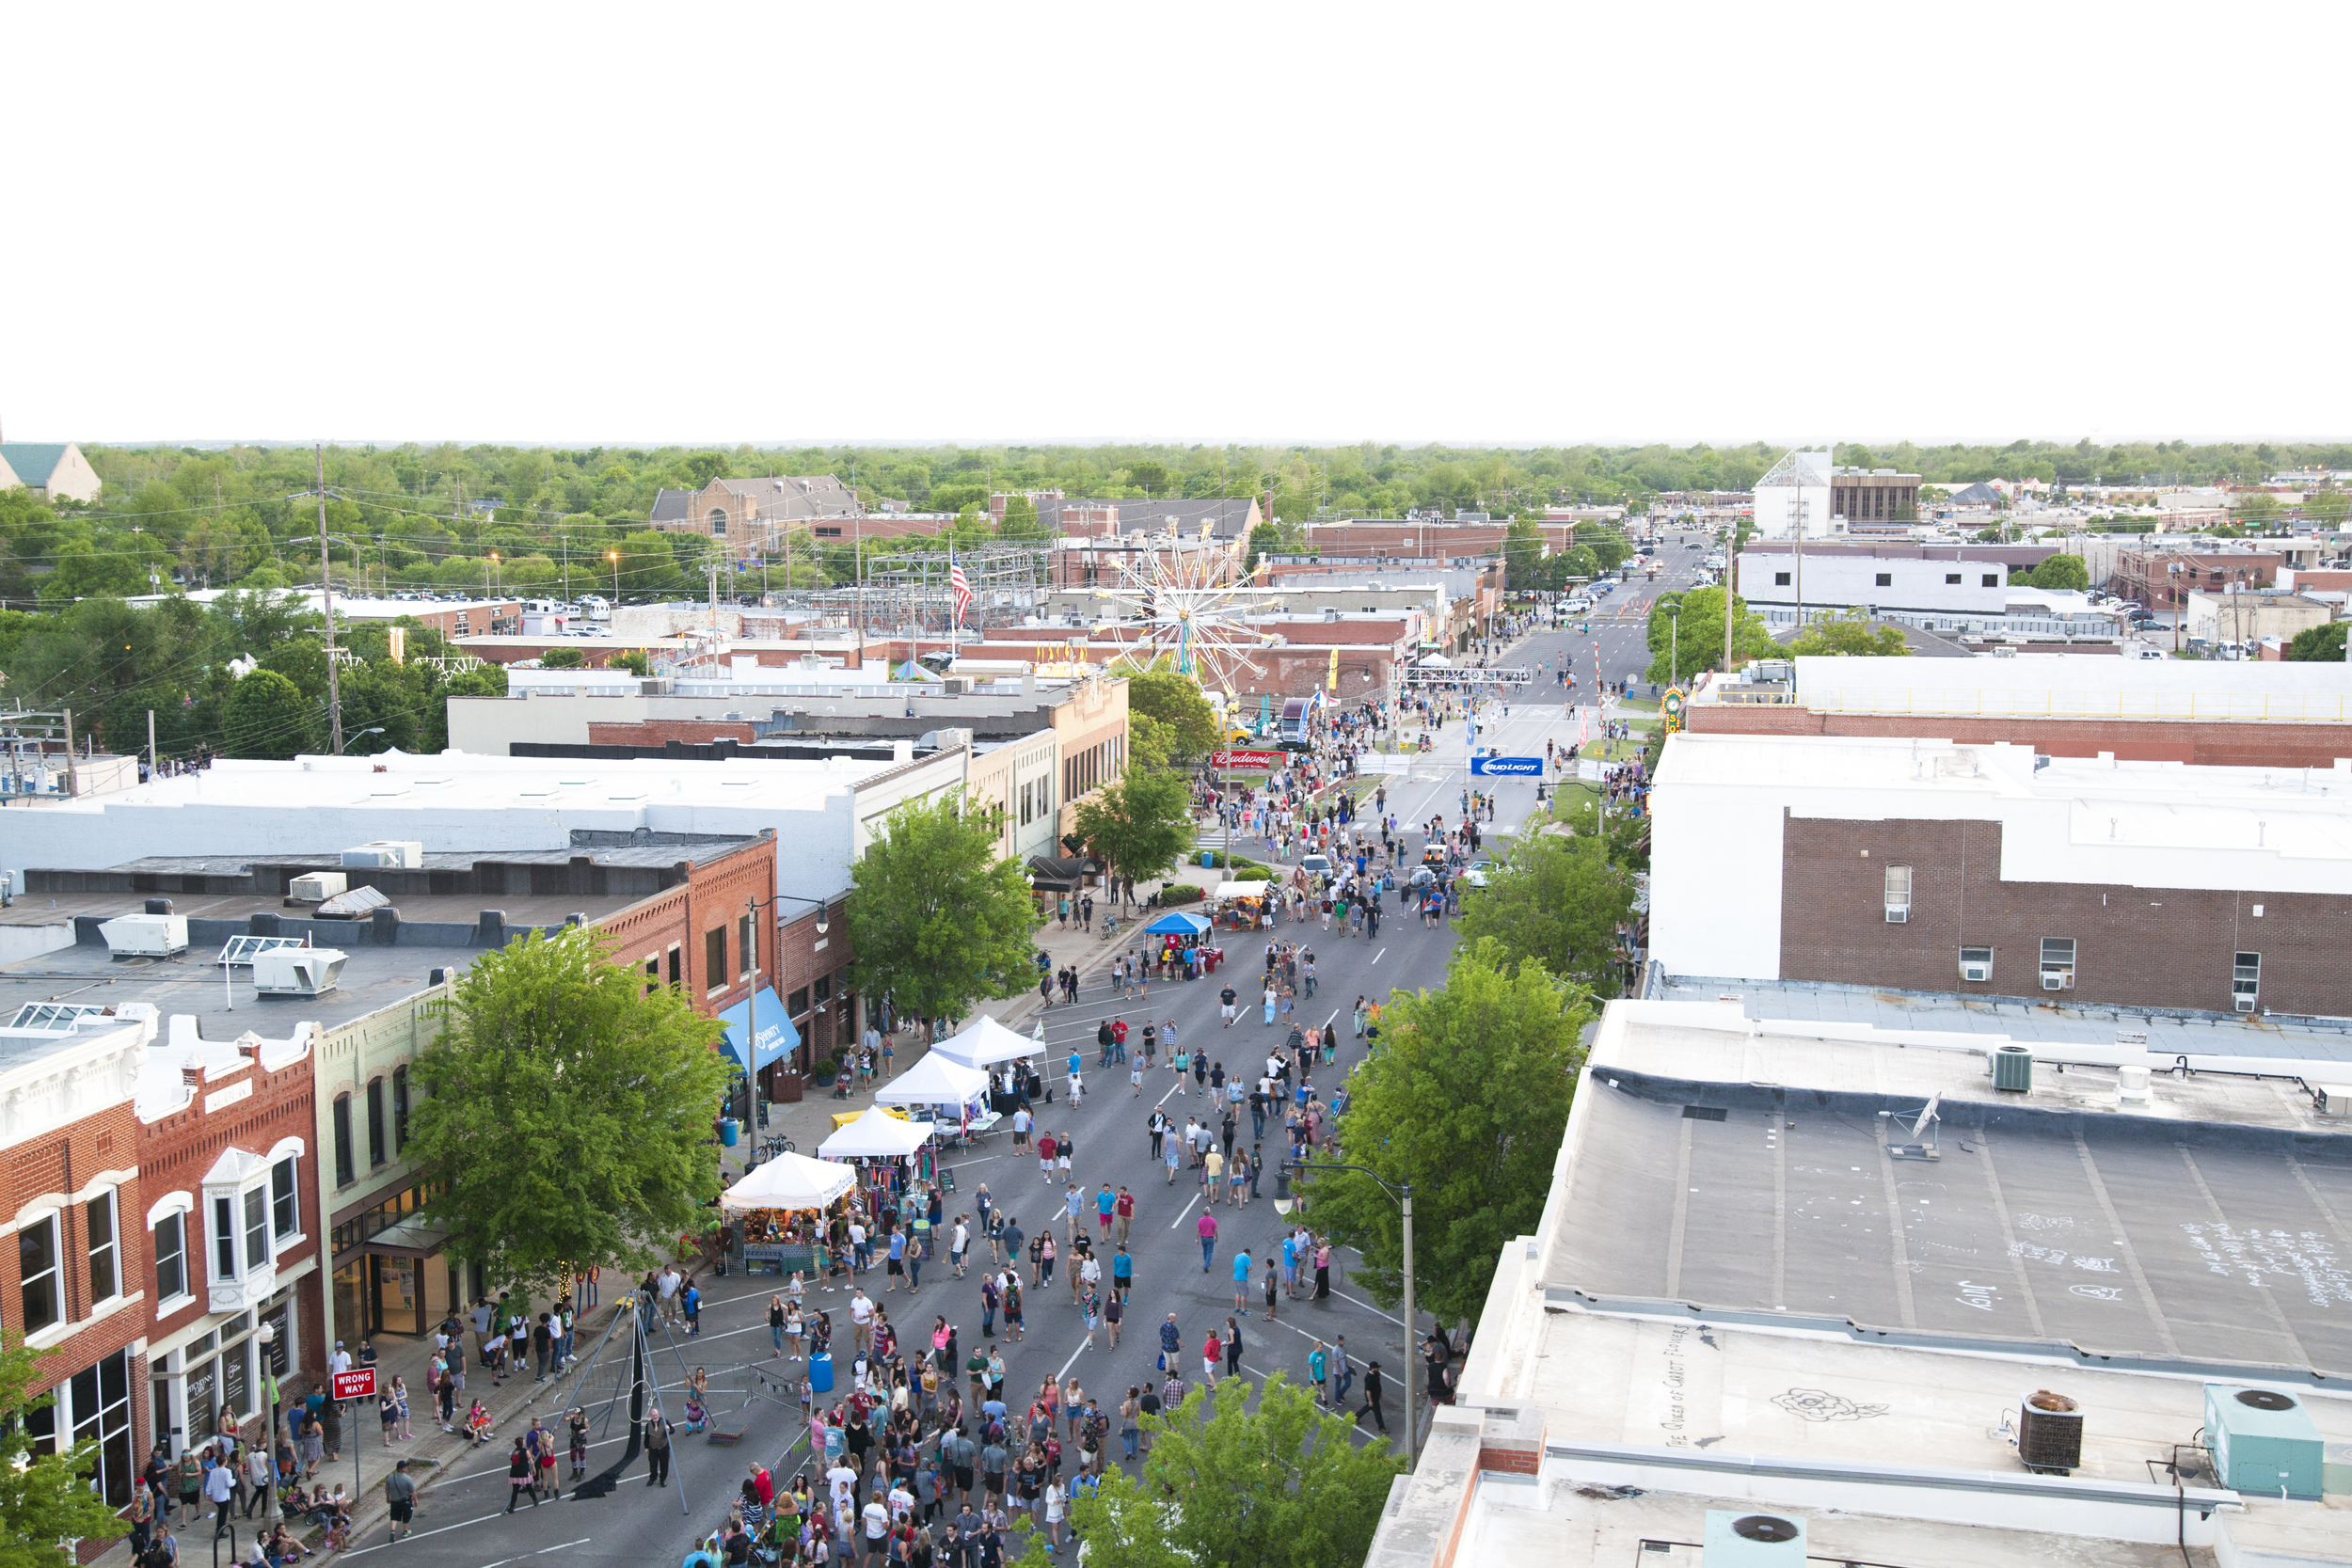  Eat, Shop, Play, Do Business in   Downtown Norman  